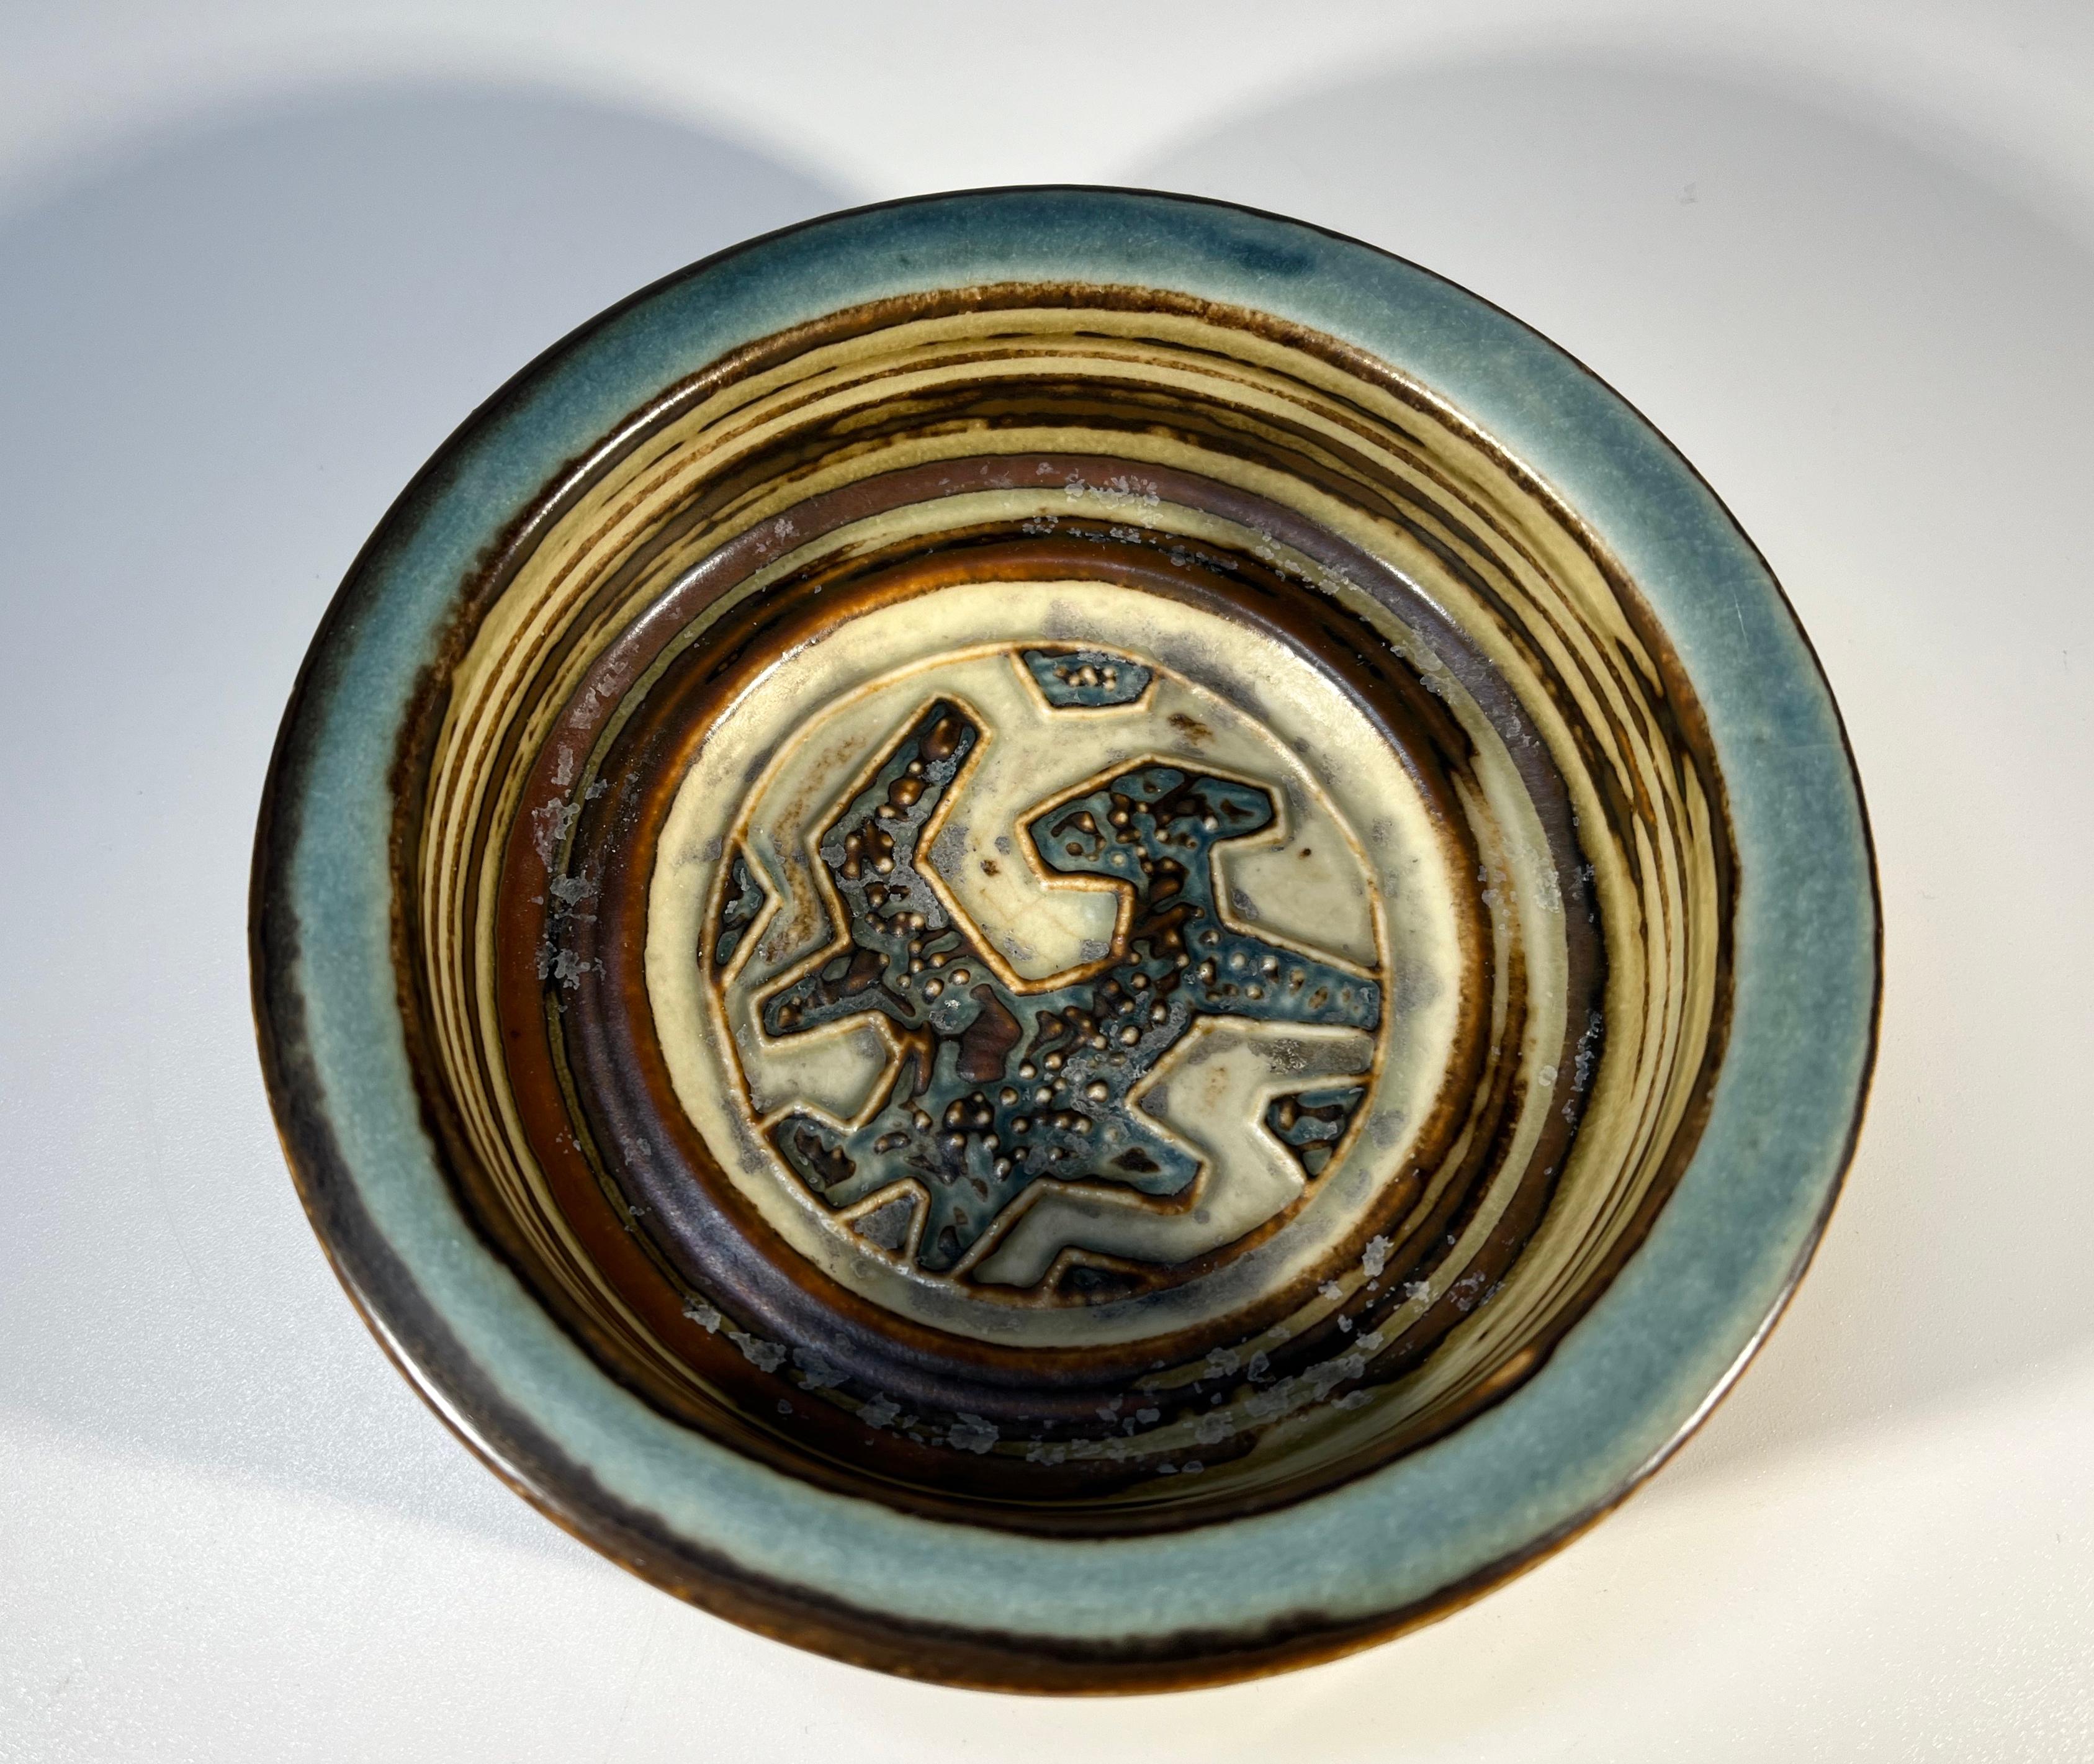 Superb Jorgen Mogensen for Royal Copenhagen dark glazed round stoneware dish with abstract central motif
Glaze is a  palette of teal, sand and dark brown tones
Circa 1960's
Signed and numbered 21942
Height 1.5 inch, Diameter 4.5 inch
Excellent